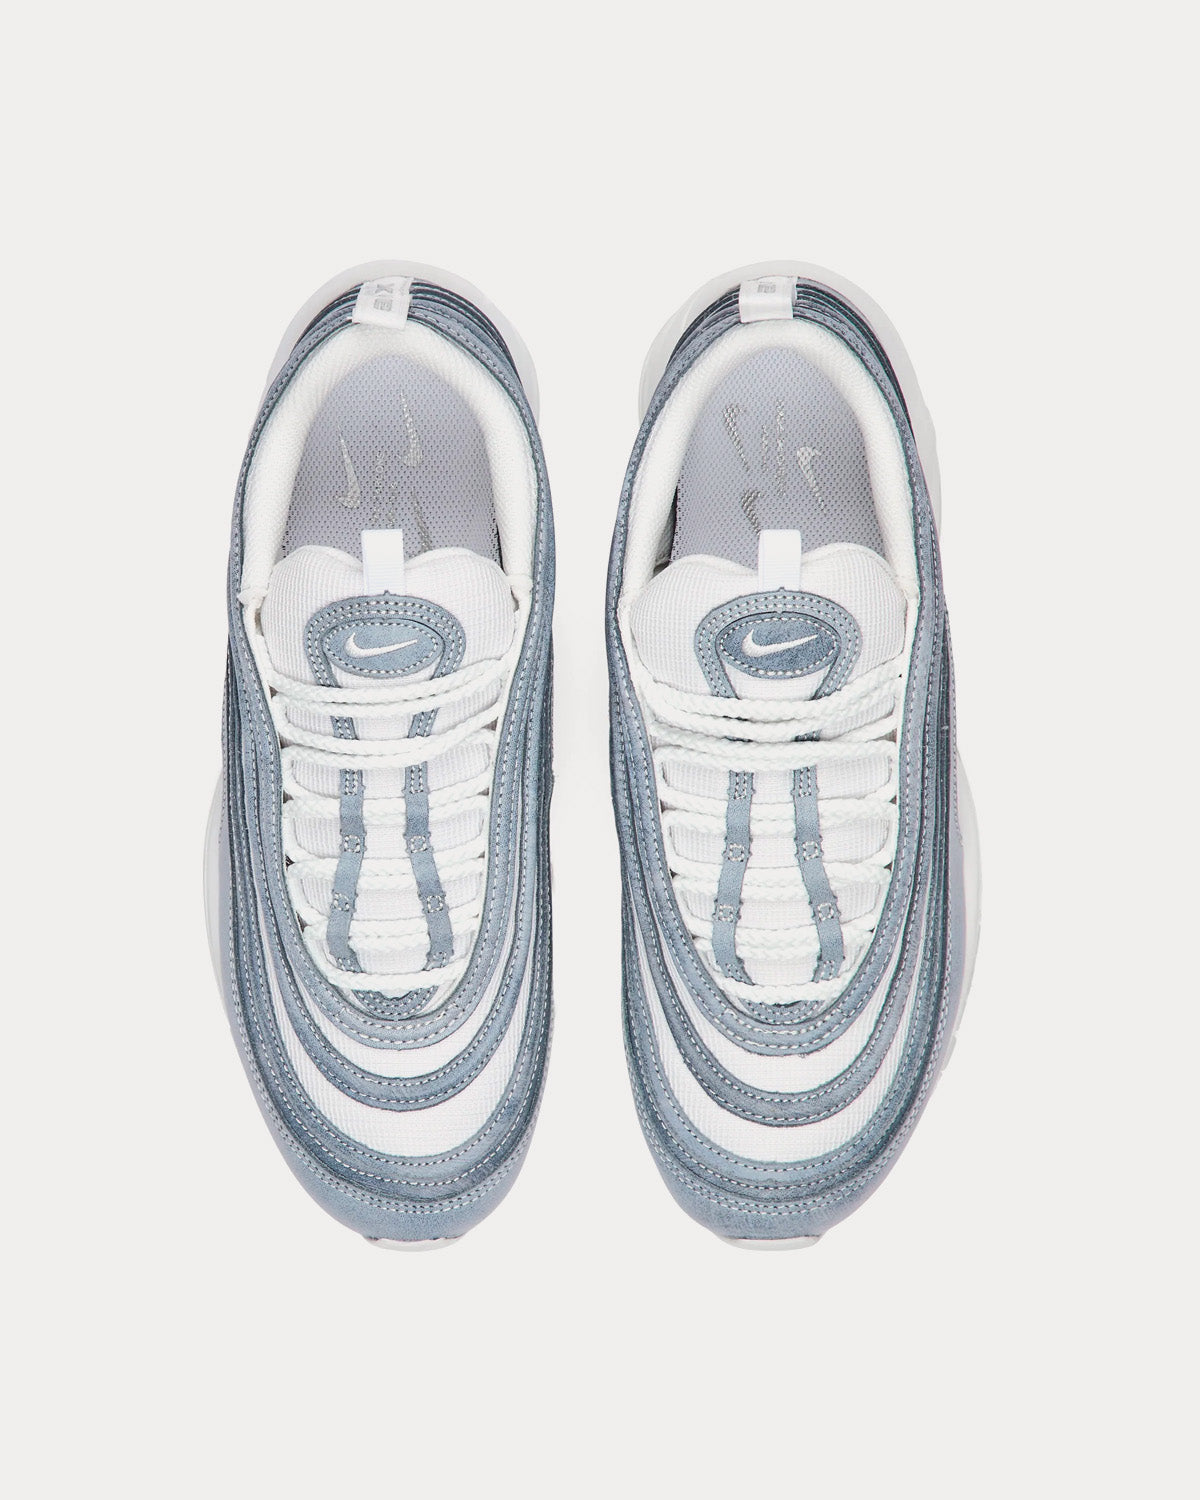 Nike x Comme des Garçons - Air Max 97 Glaicer Grey Low Top Sneakers